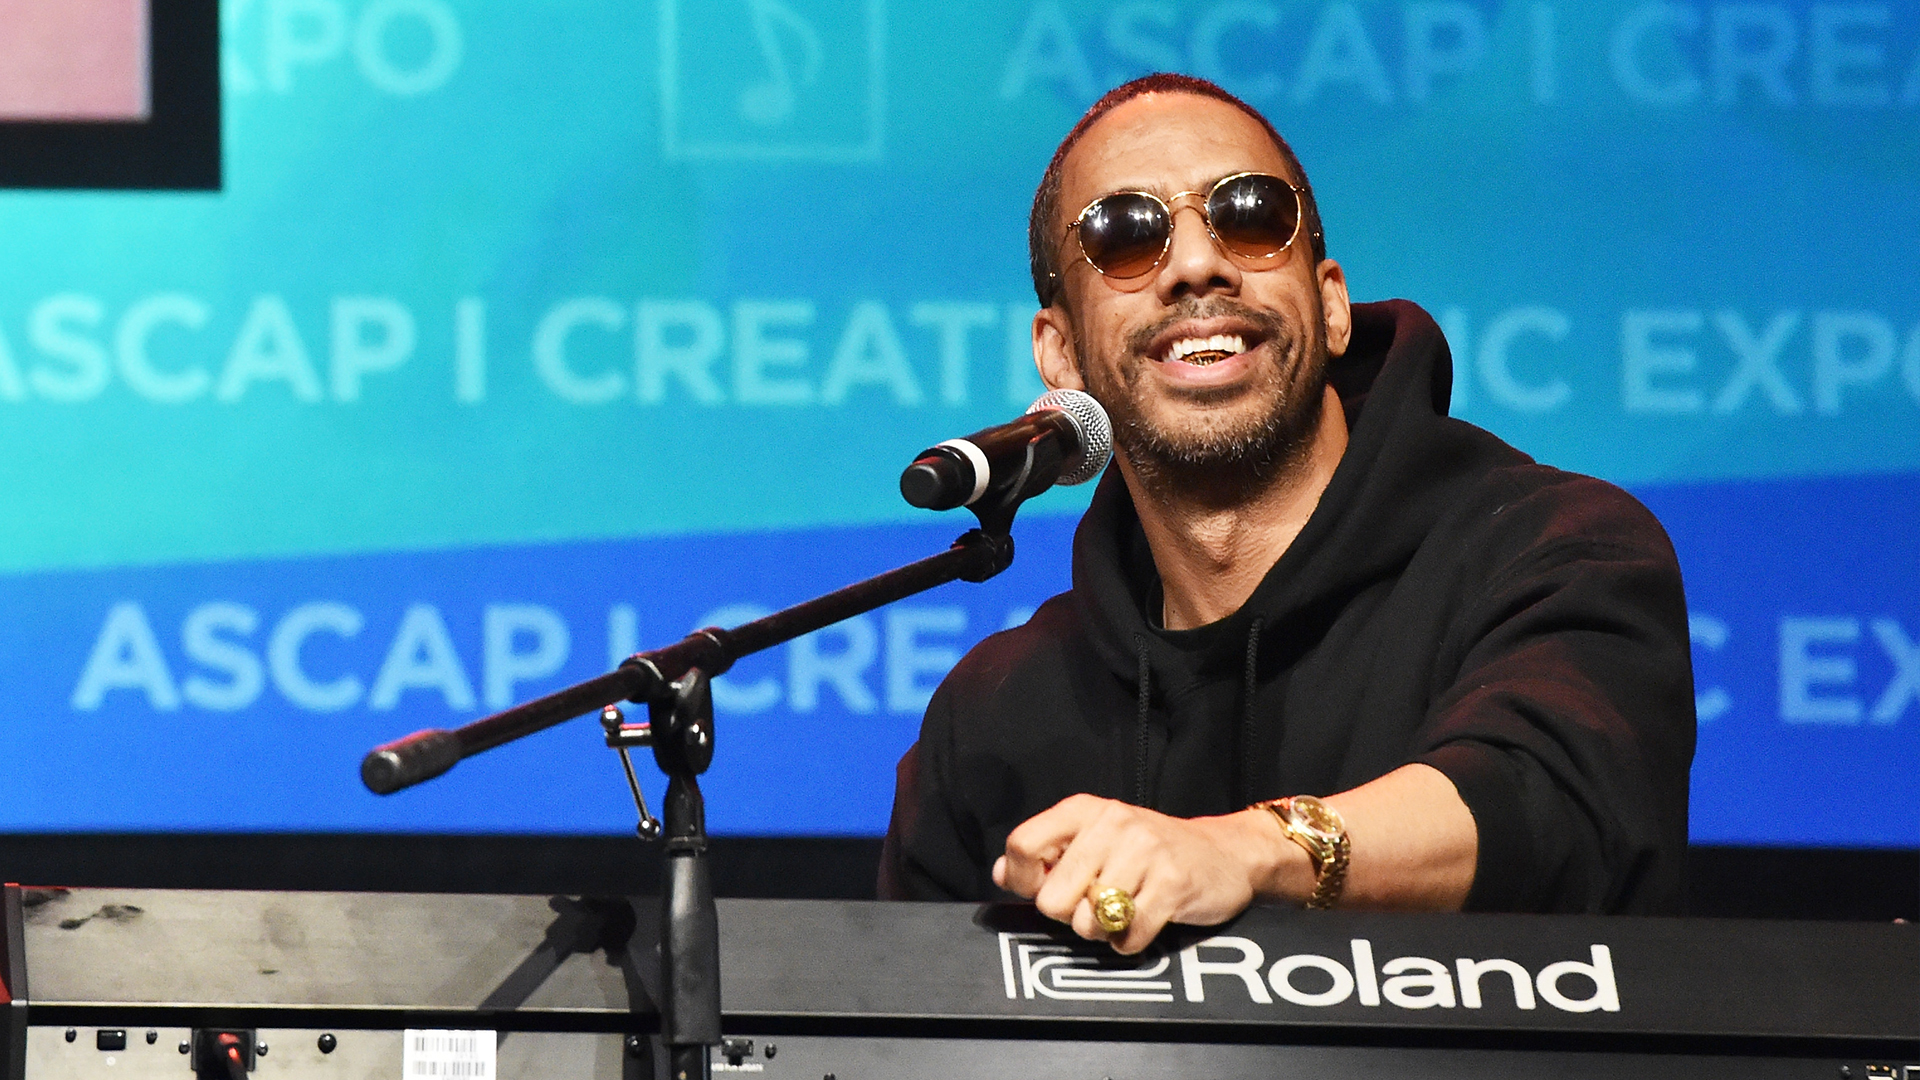 Ryan Leslie Says He Turned A $100K Investment Into $16M Thanks To Advice From His Mentor